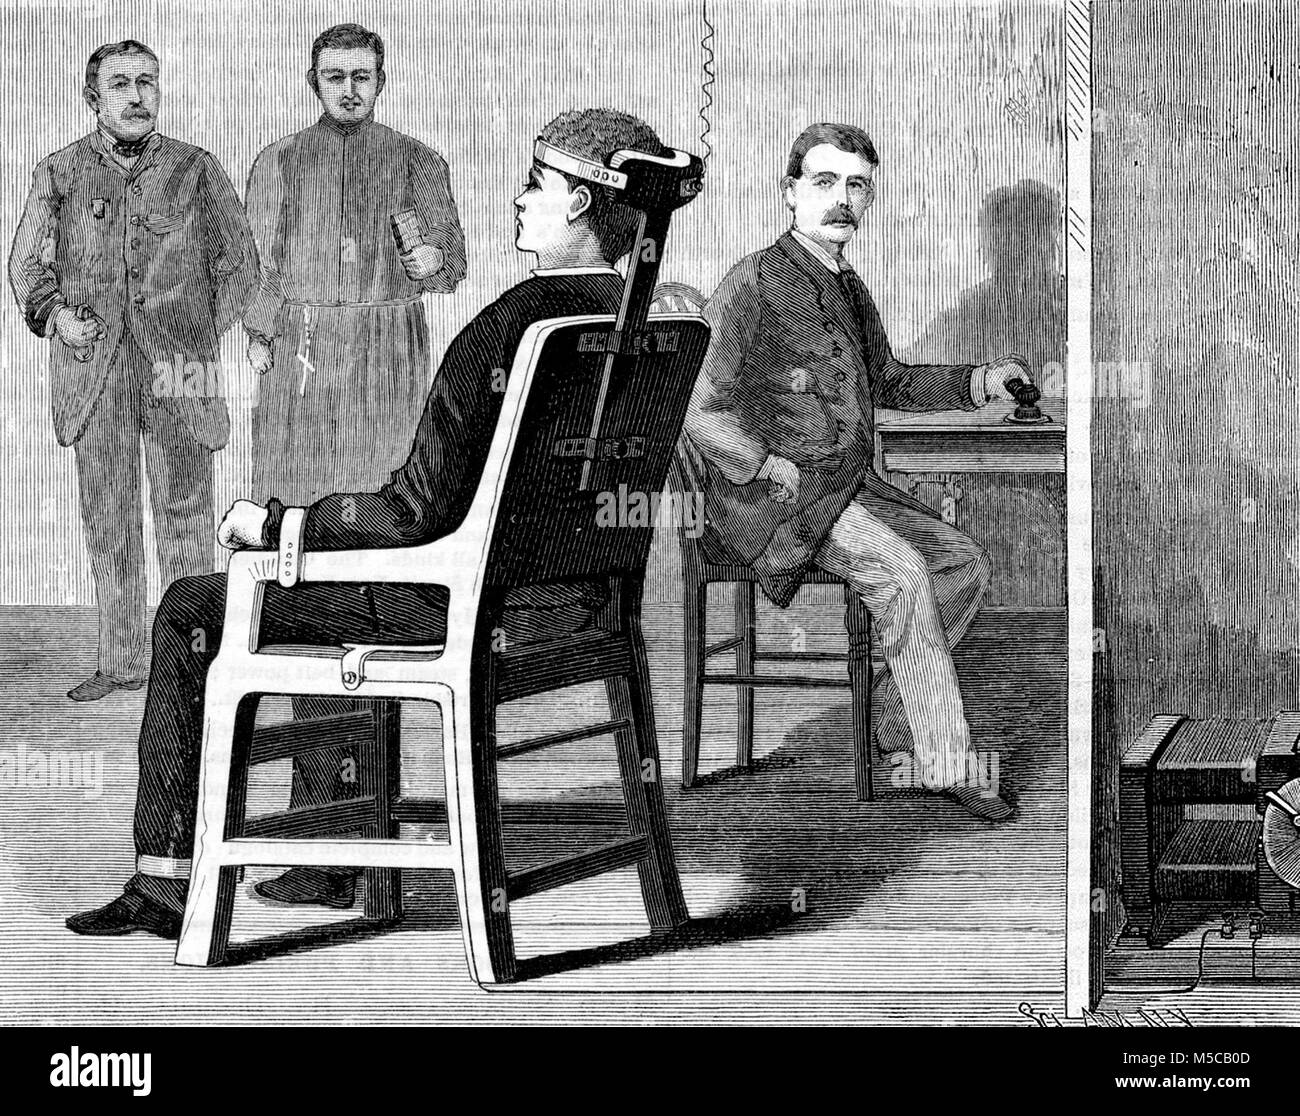 'EXECUTION BY ELECTRICITY SHORTLY TO BE INTRODUCED IN N Y STATE' from the JUNE 30, 1888 Scientific American depicting the newly approved form of capital punishment in New York State, the 'electric chair' based on Alfred P. Southwick's design. This design would be refined over the next year by the New York Medico-Legal Society. It was first used on August 6, 1890 to put condemned criminal William Kemmler to death. Stock Photo